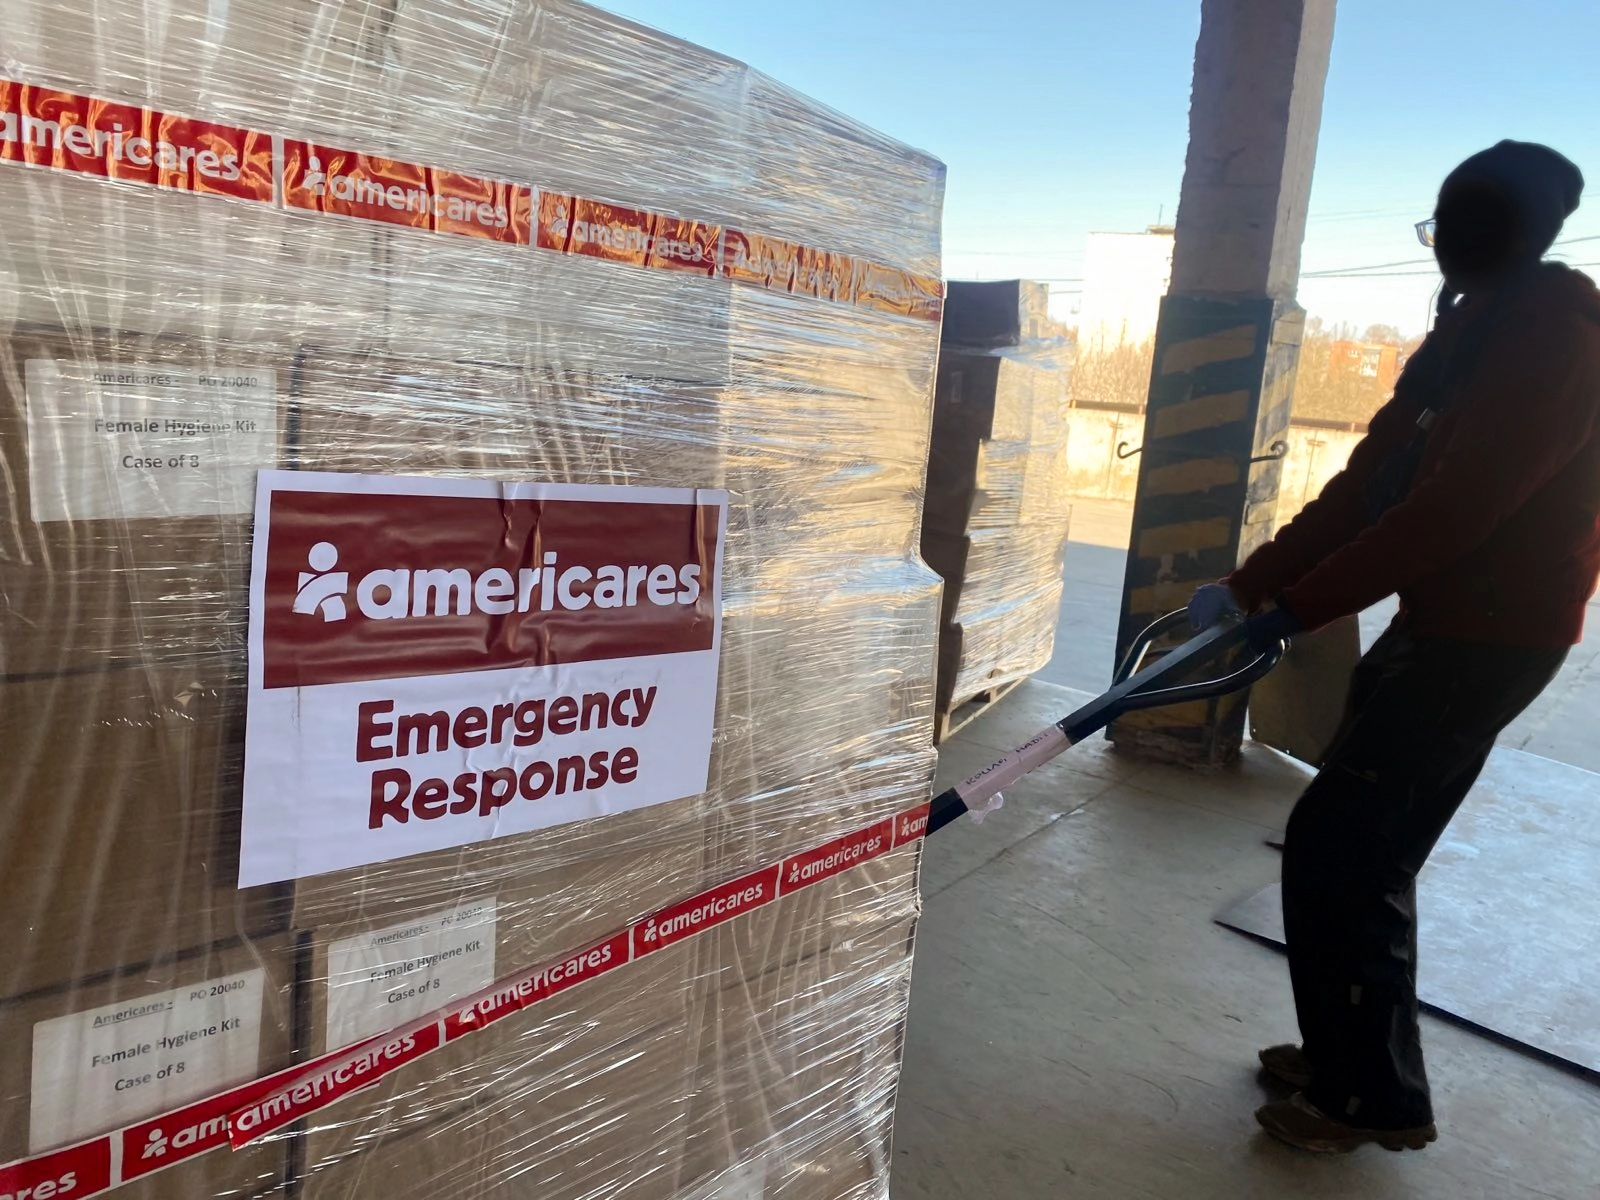 silhouette of worker moving palette of emergency response supplies with americares emergency response branding on the shipment wrapping.